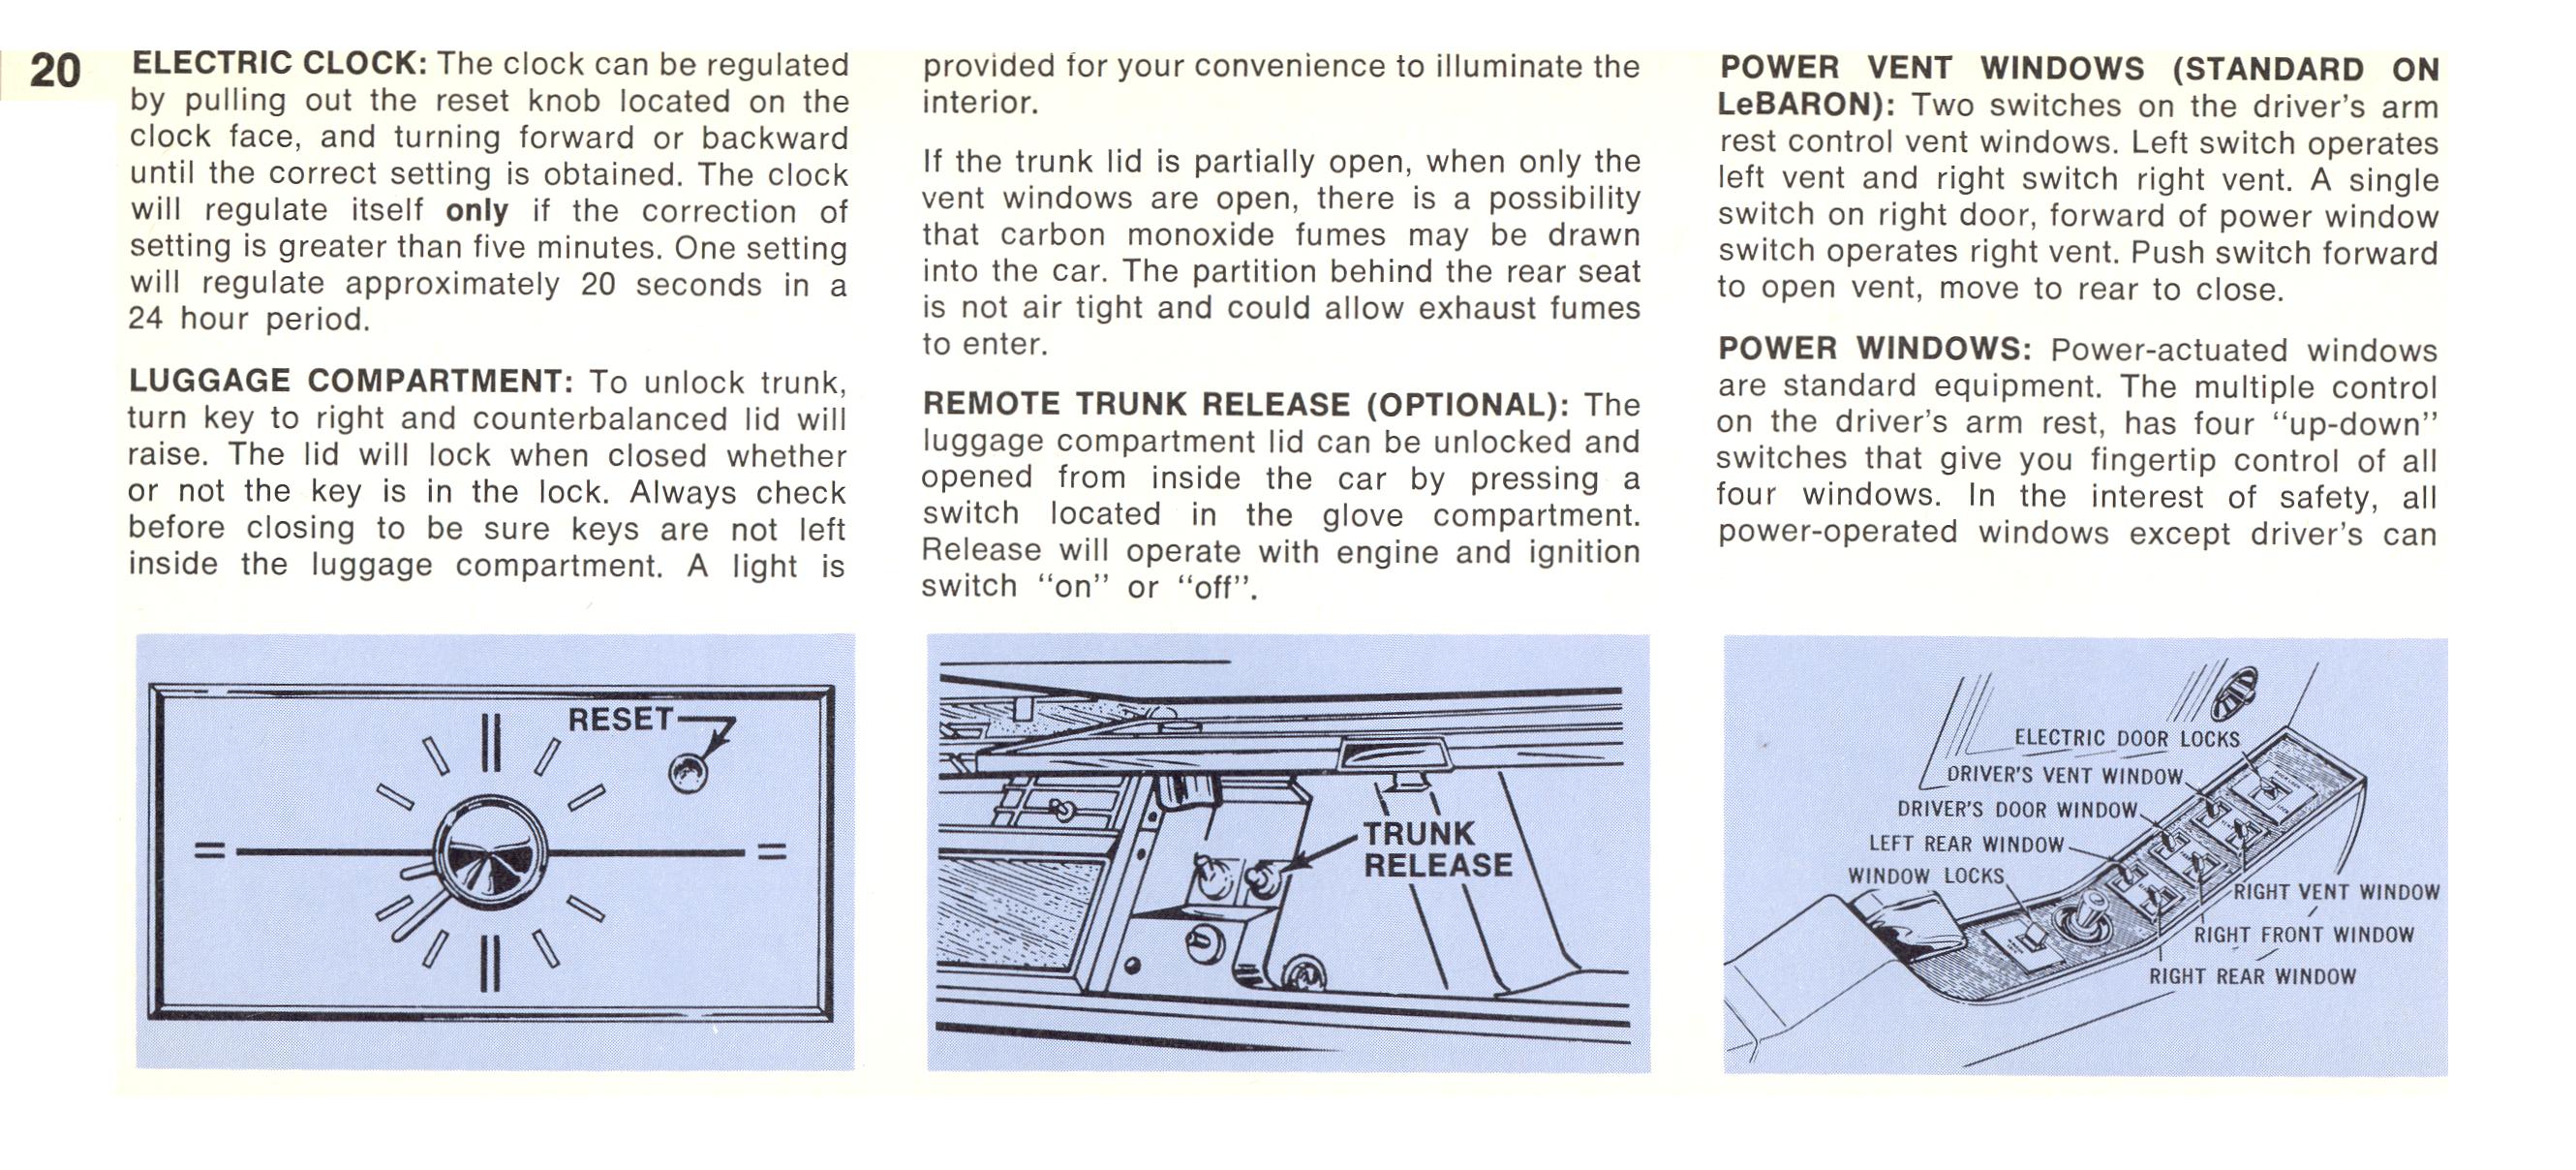 1968 Chrysler Imperial Owners Manual Page 3